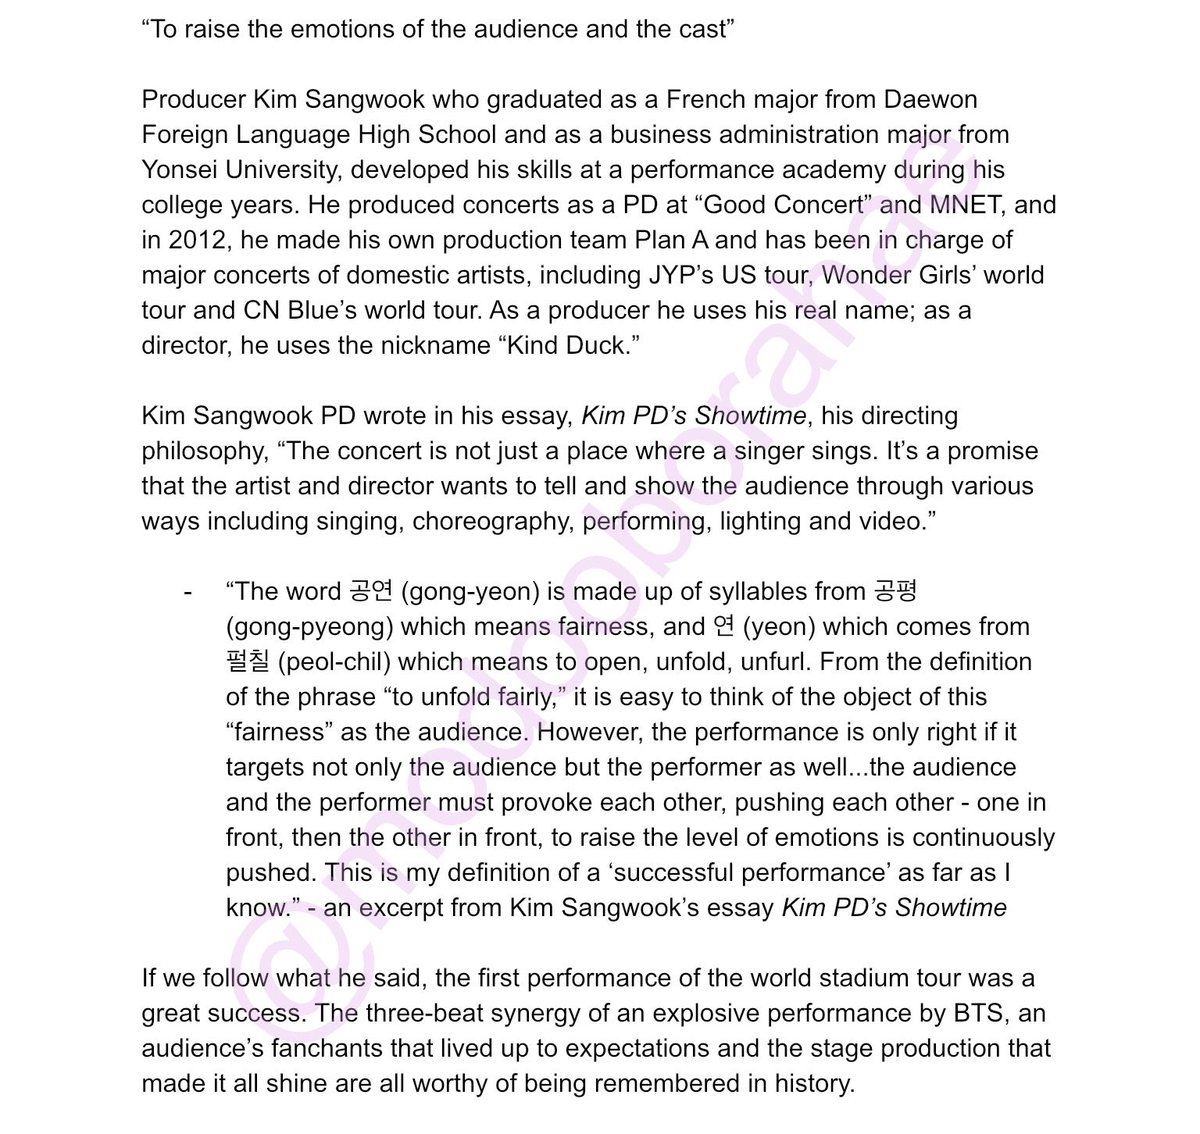 Here’s the article on Kim Sangwook from PlanA. He has done all their stage production for their concerts since the beginning. Sorry it took so long to come out  @BTS_twt  #BTS  #방탄소년단   https://topclass.chosun.com/mobile/board/view.asp?catecode=R&tnu=201906100015